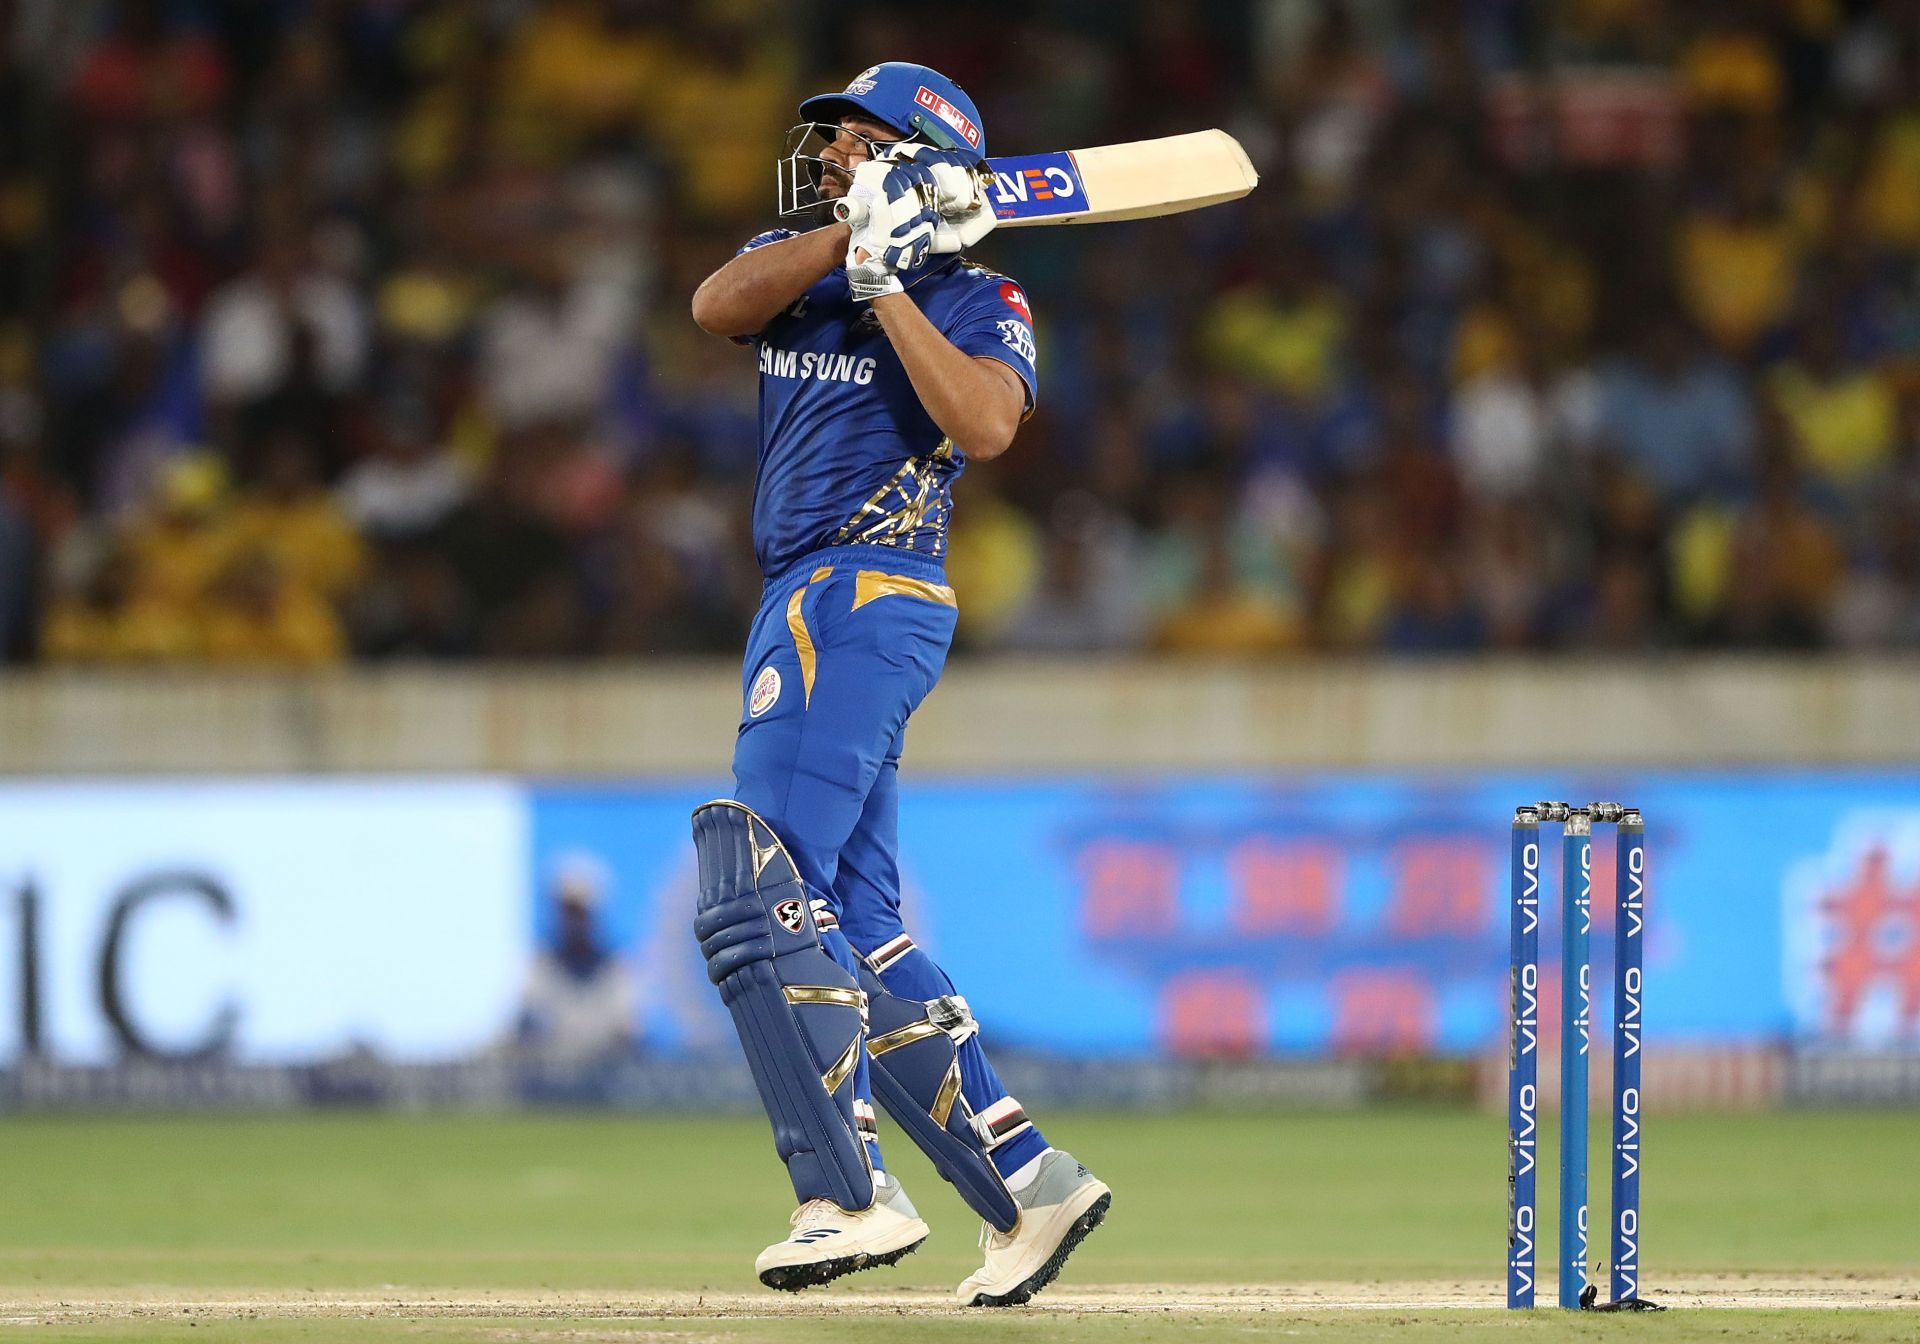 The MI captain in action during the 2019 final. Pic: Getty Images